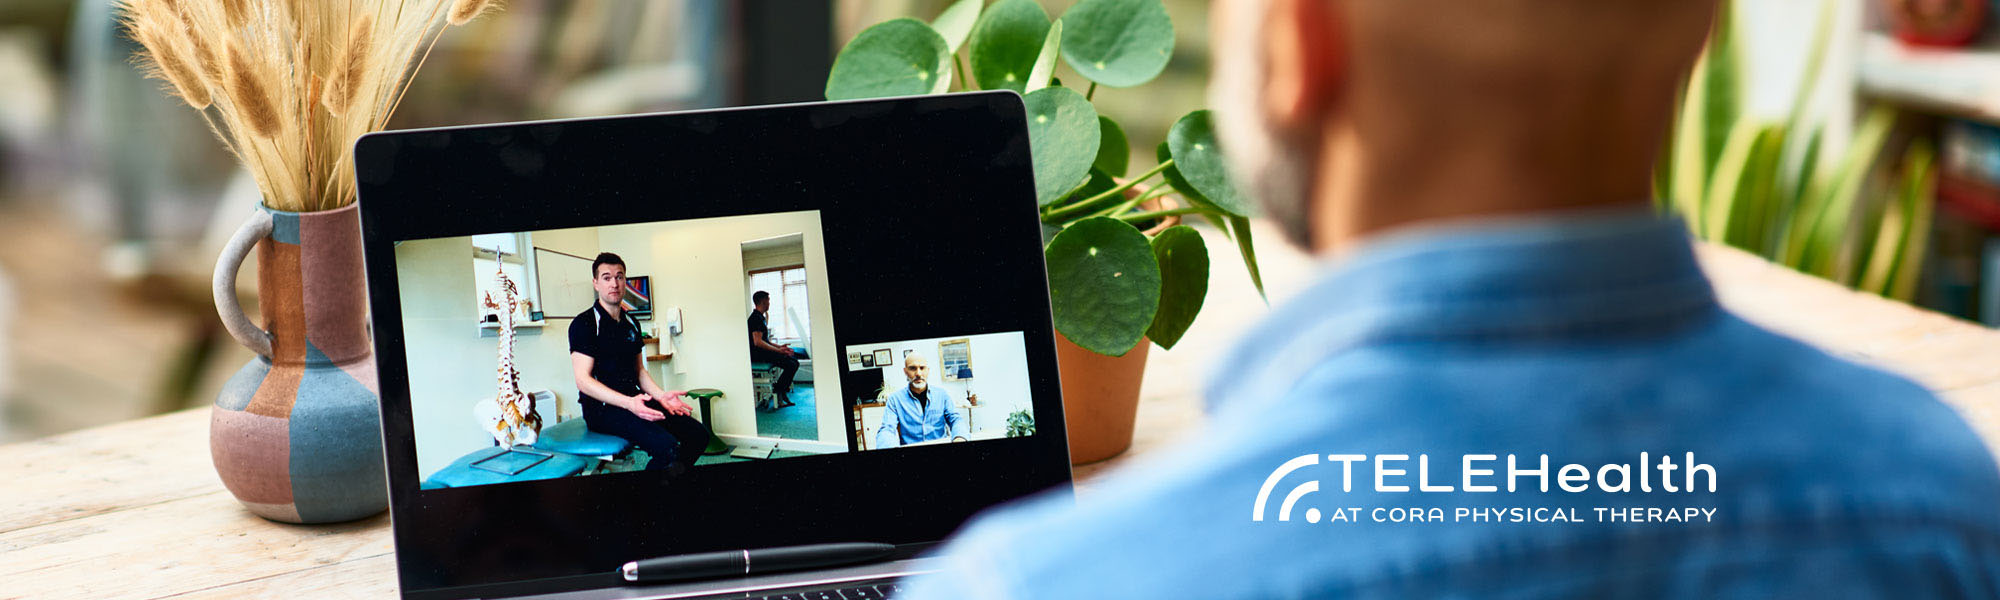 TeleHealth: Stay Connected. Stay on Track.